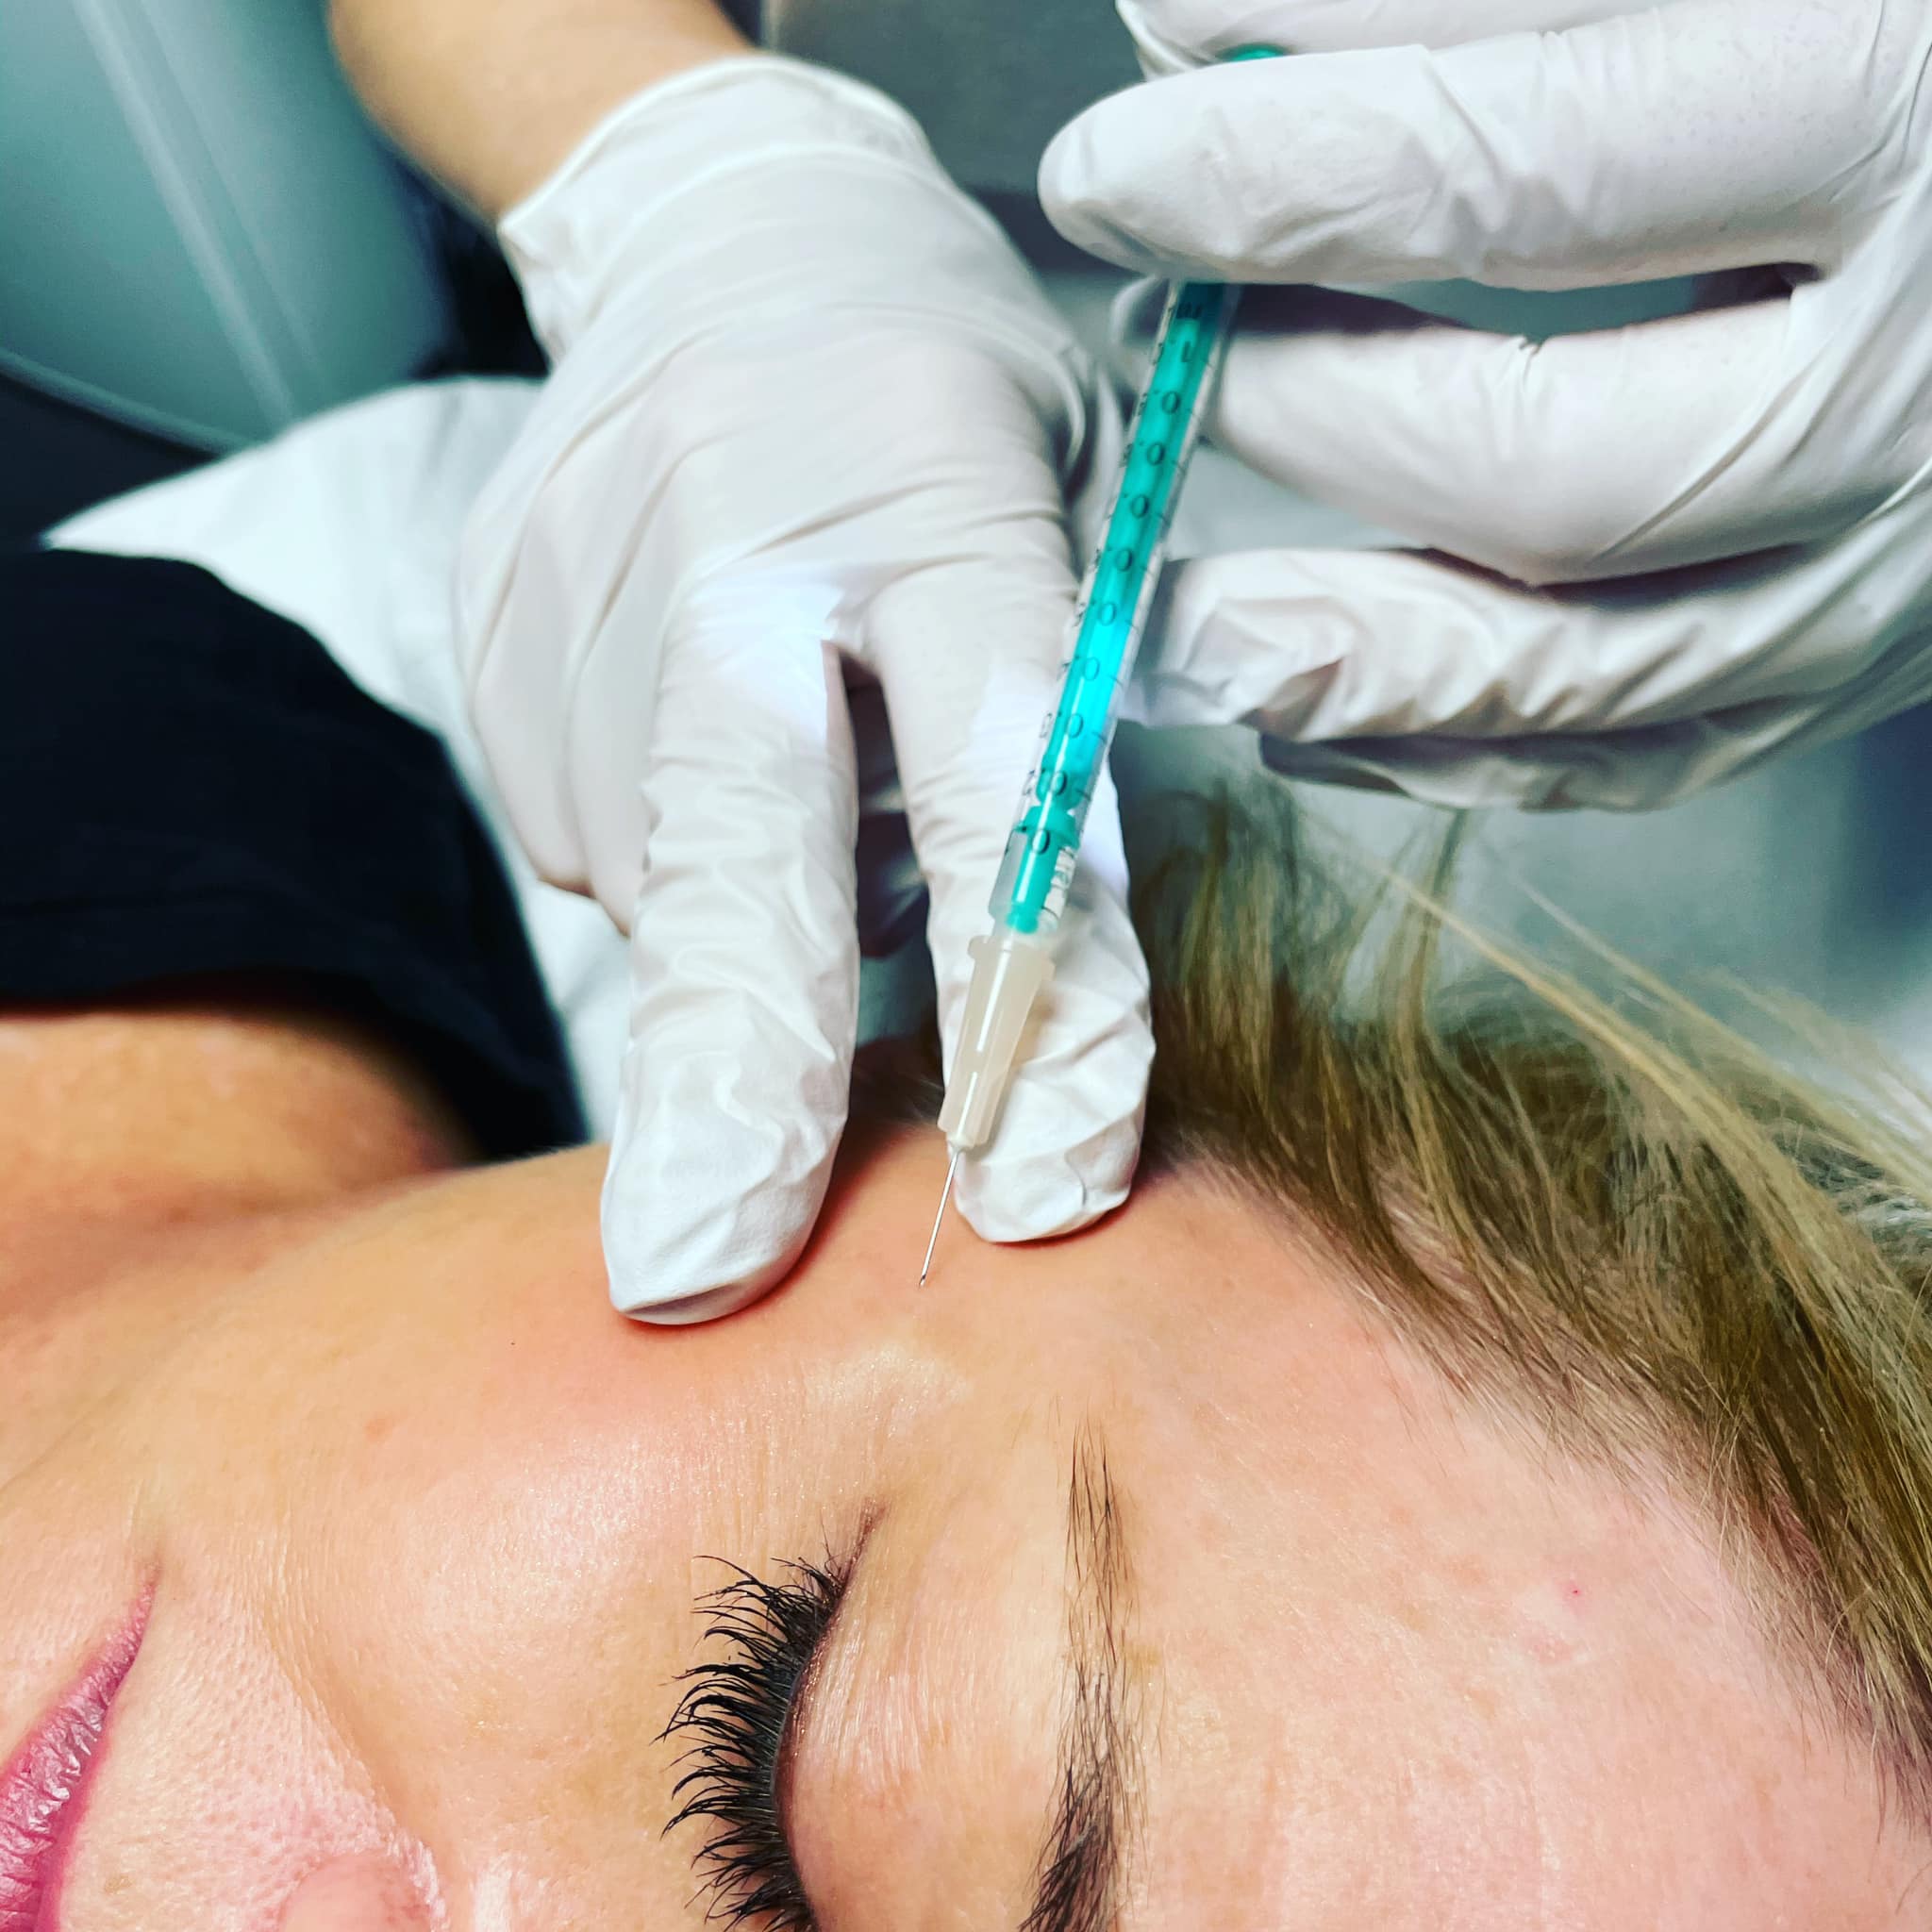 What are aesthetic treatments?